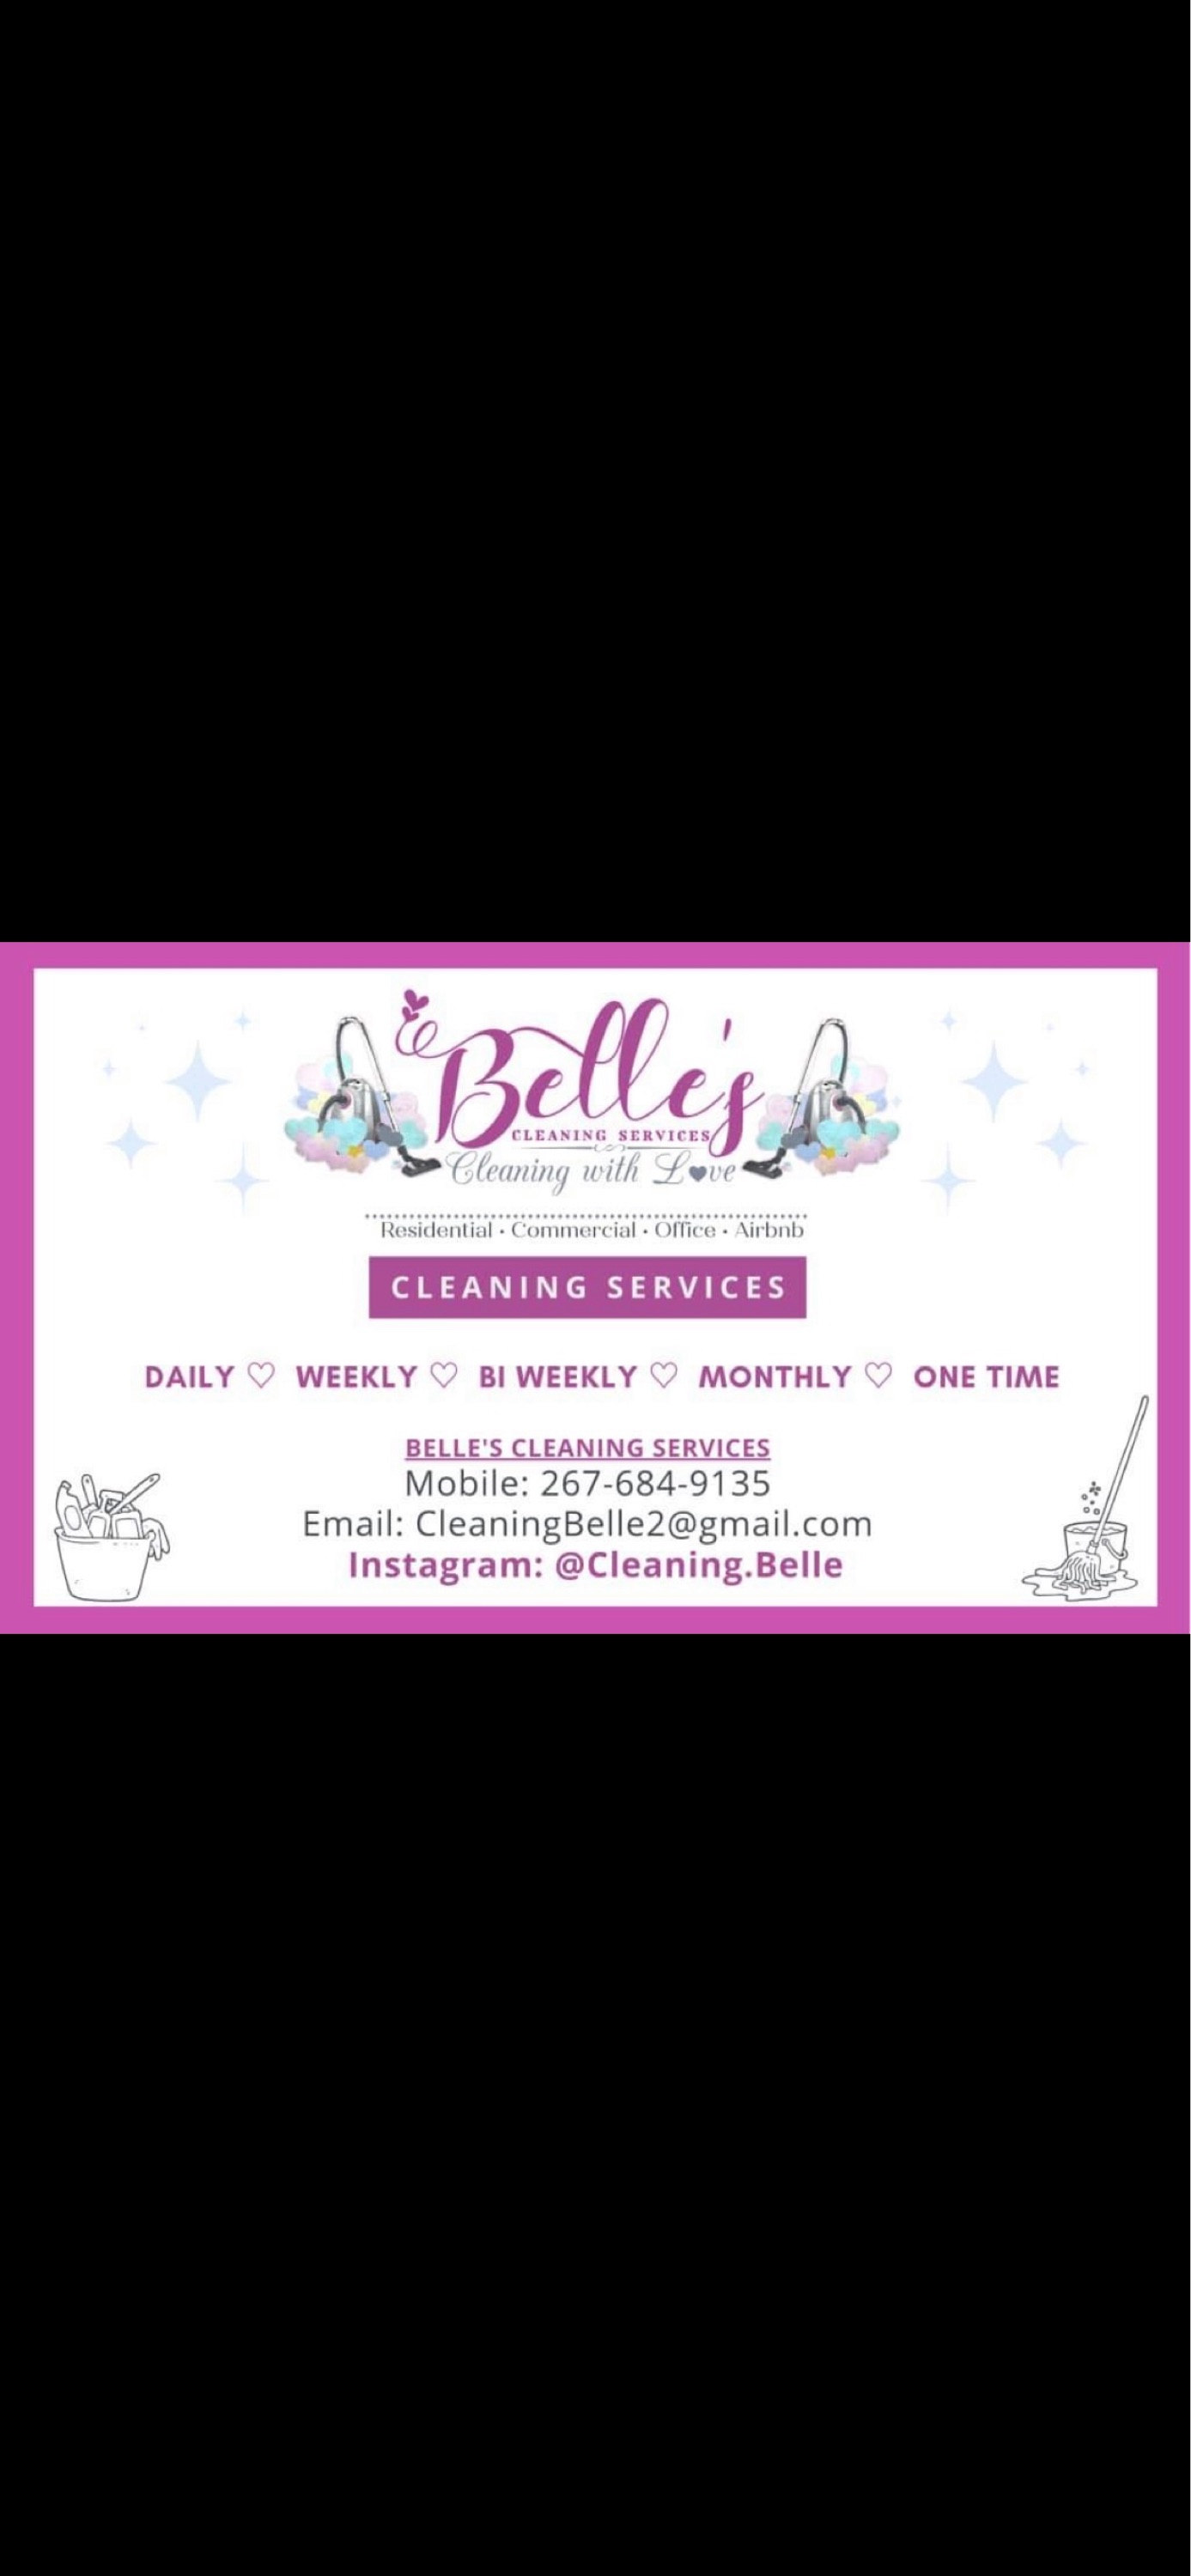 Bells Cleaning Services Logo